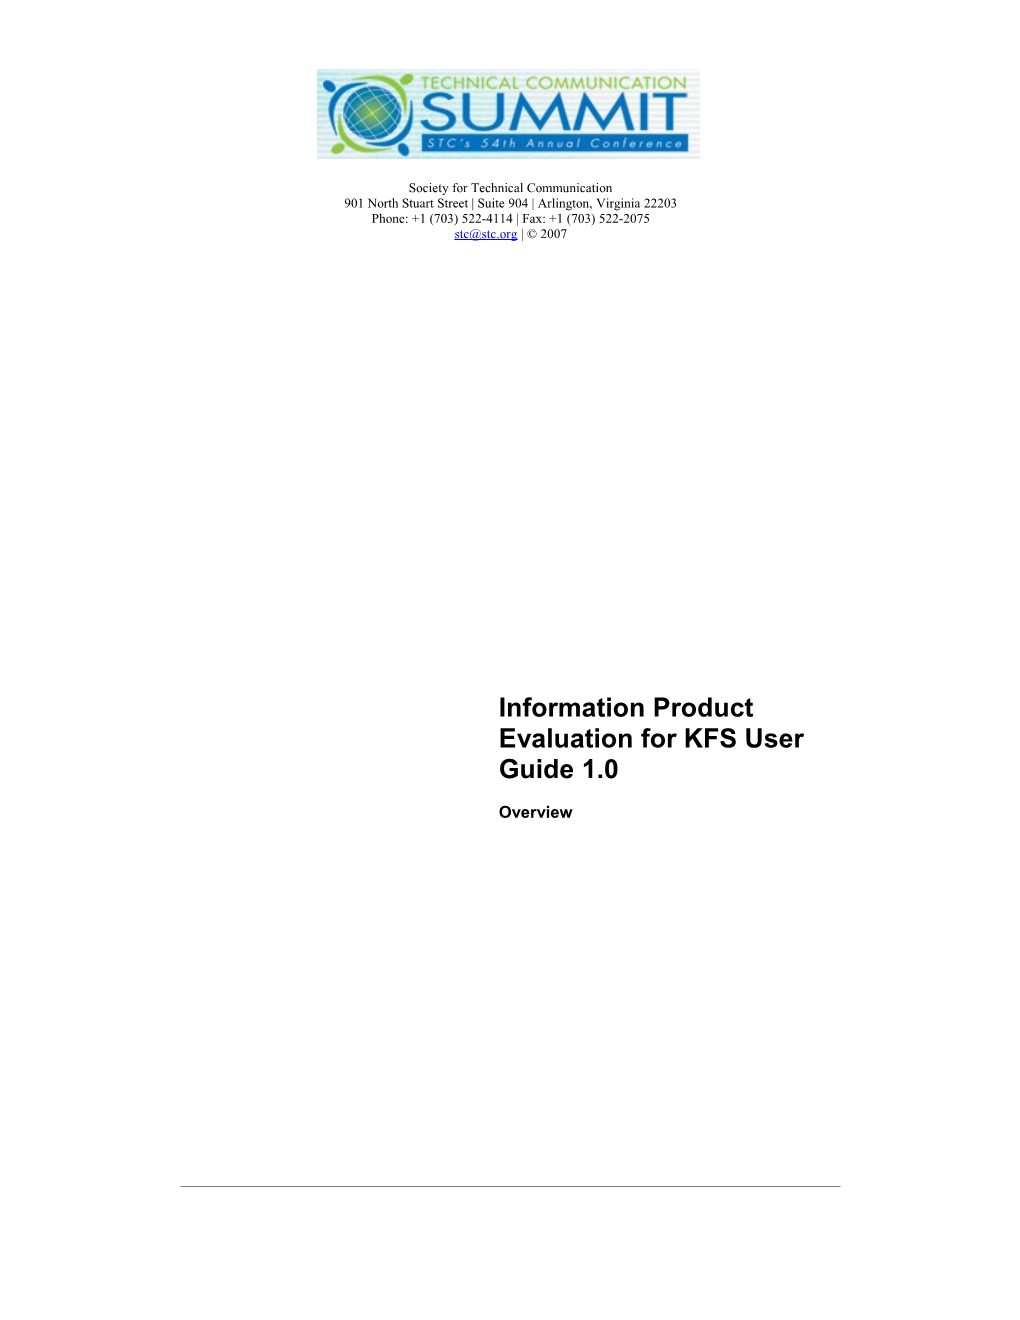 Information Product Evaluation for KFS User Guide